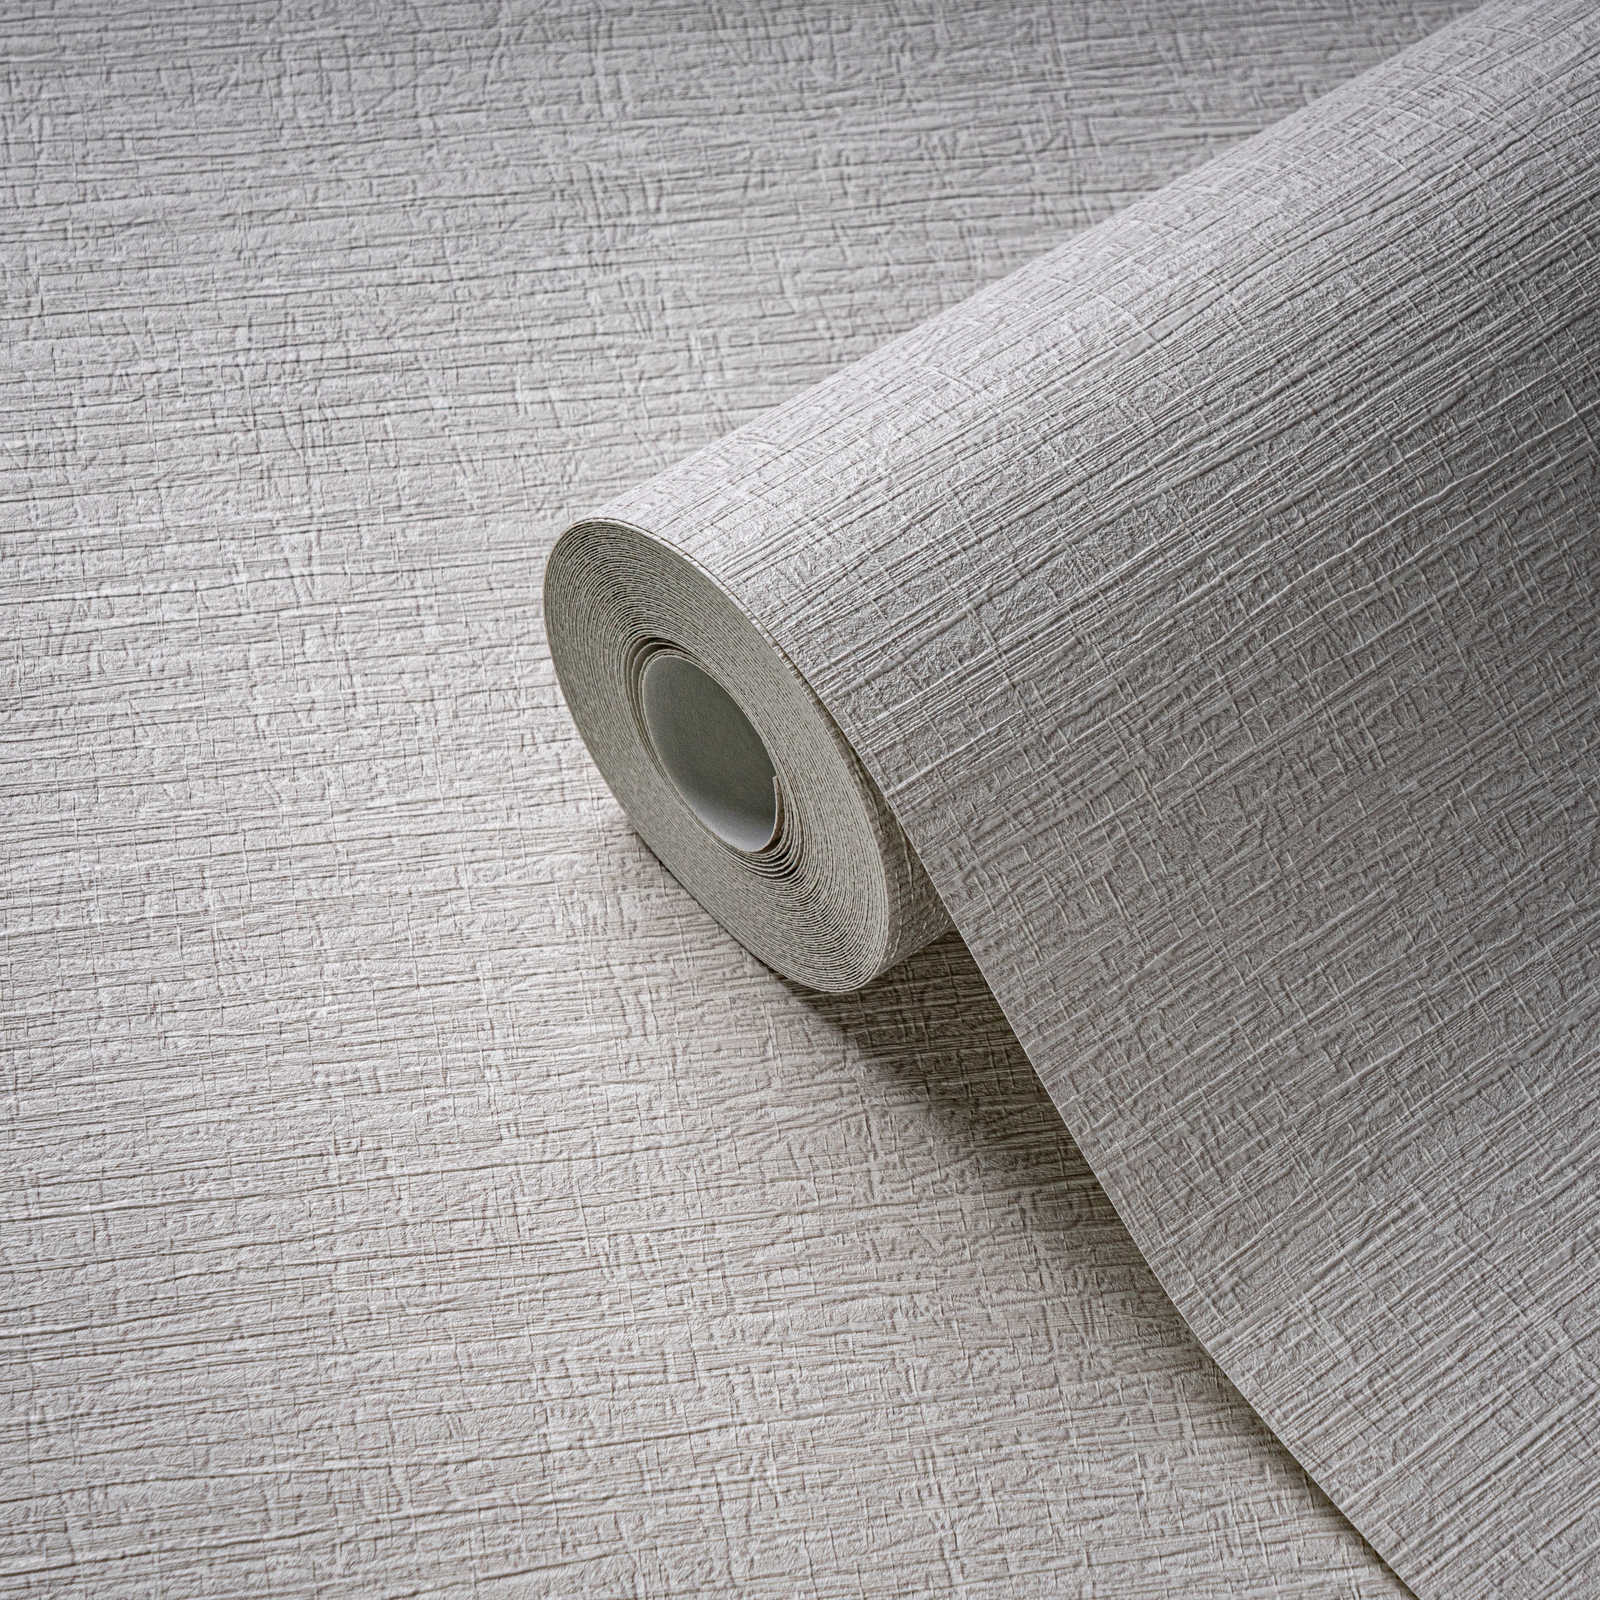             Simple plain wallpaper with a light texture - grey
        